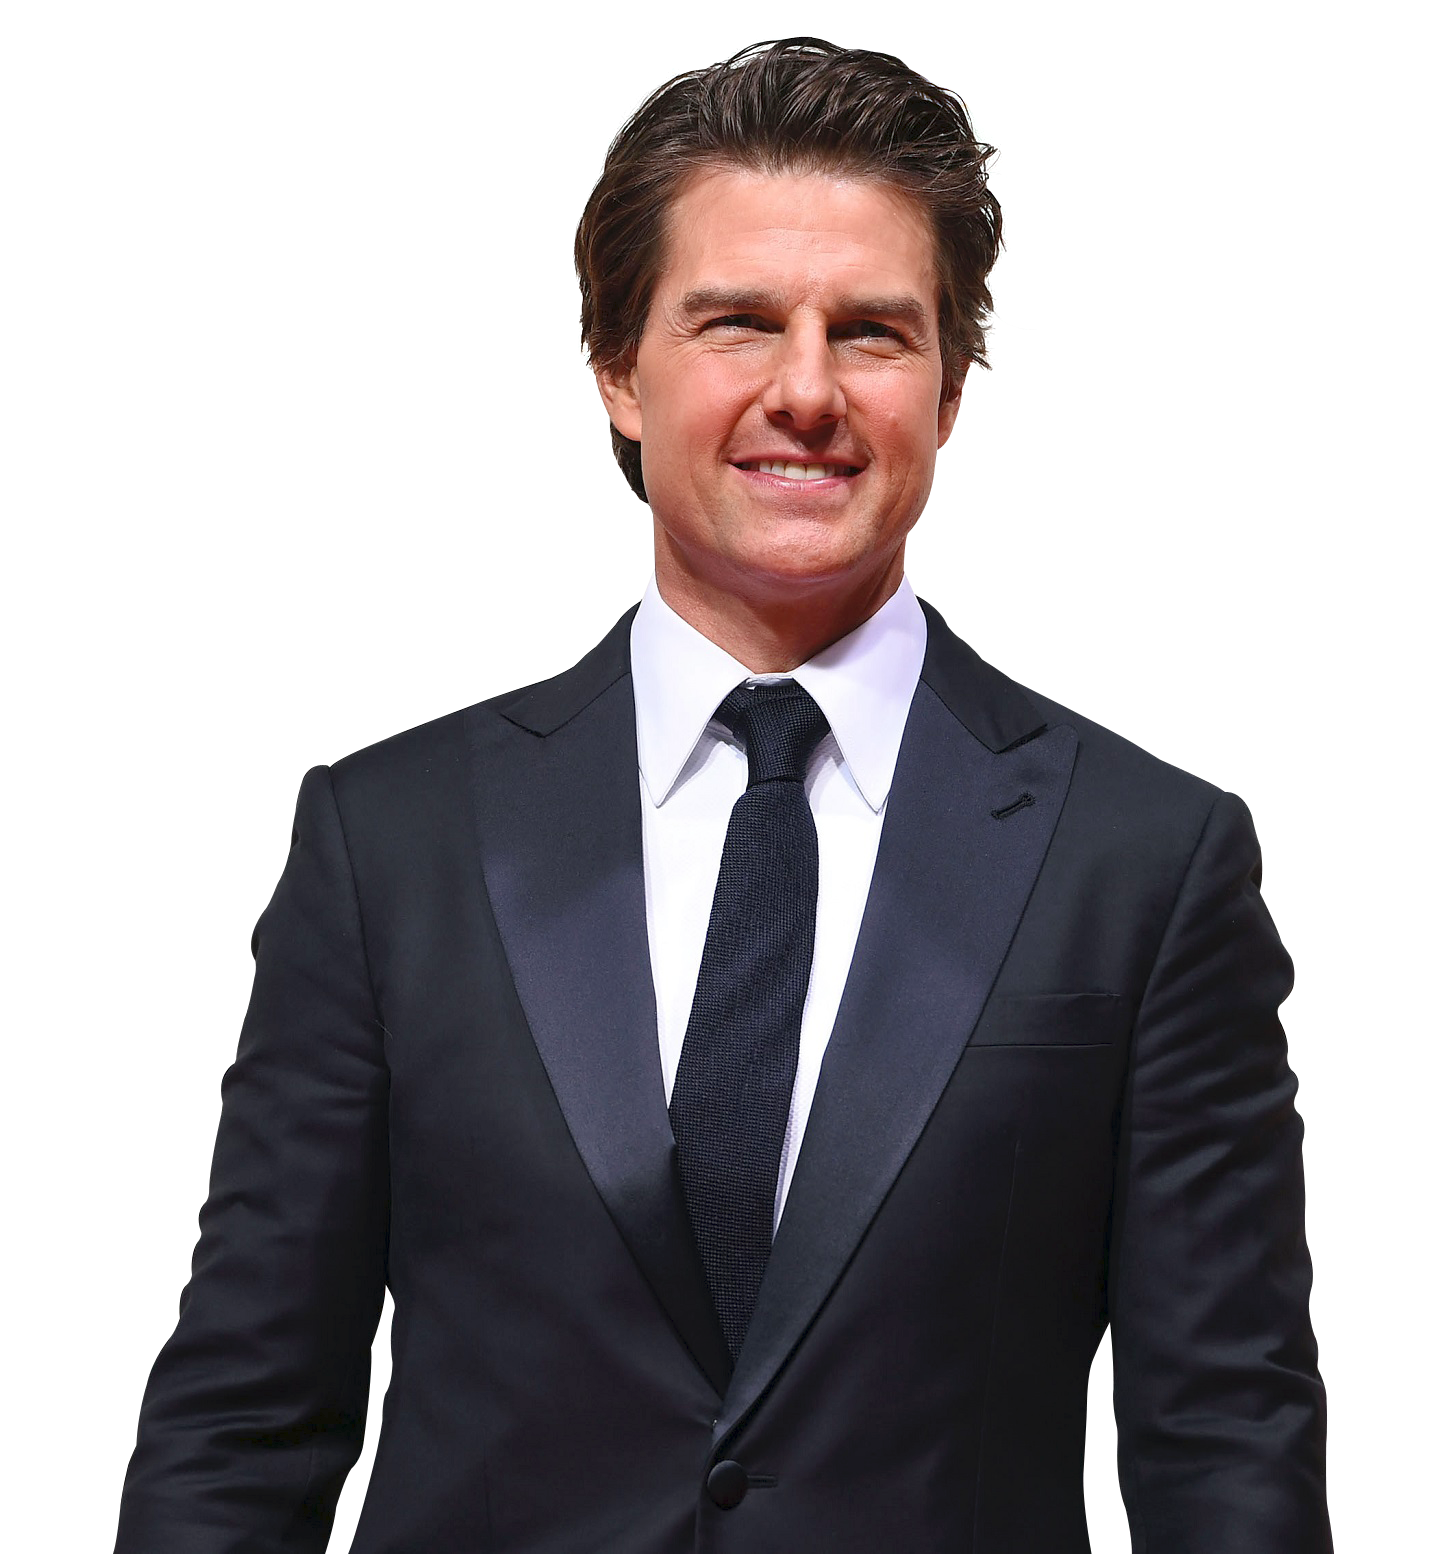 Tom Cruise PNG-PlusPNG.com-10